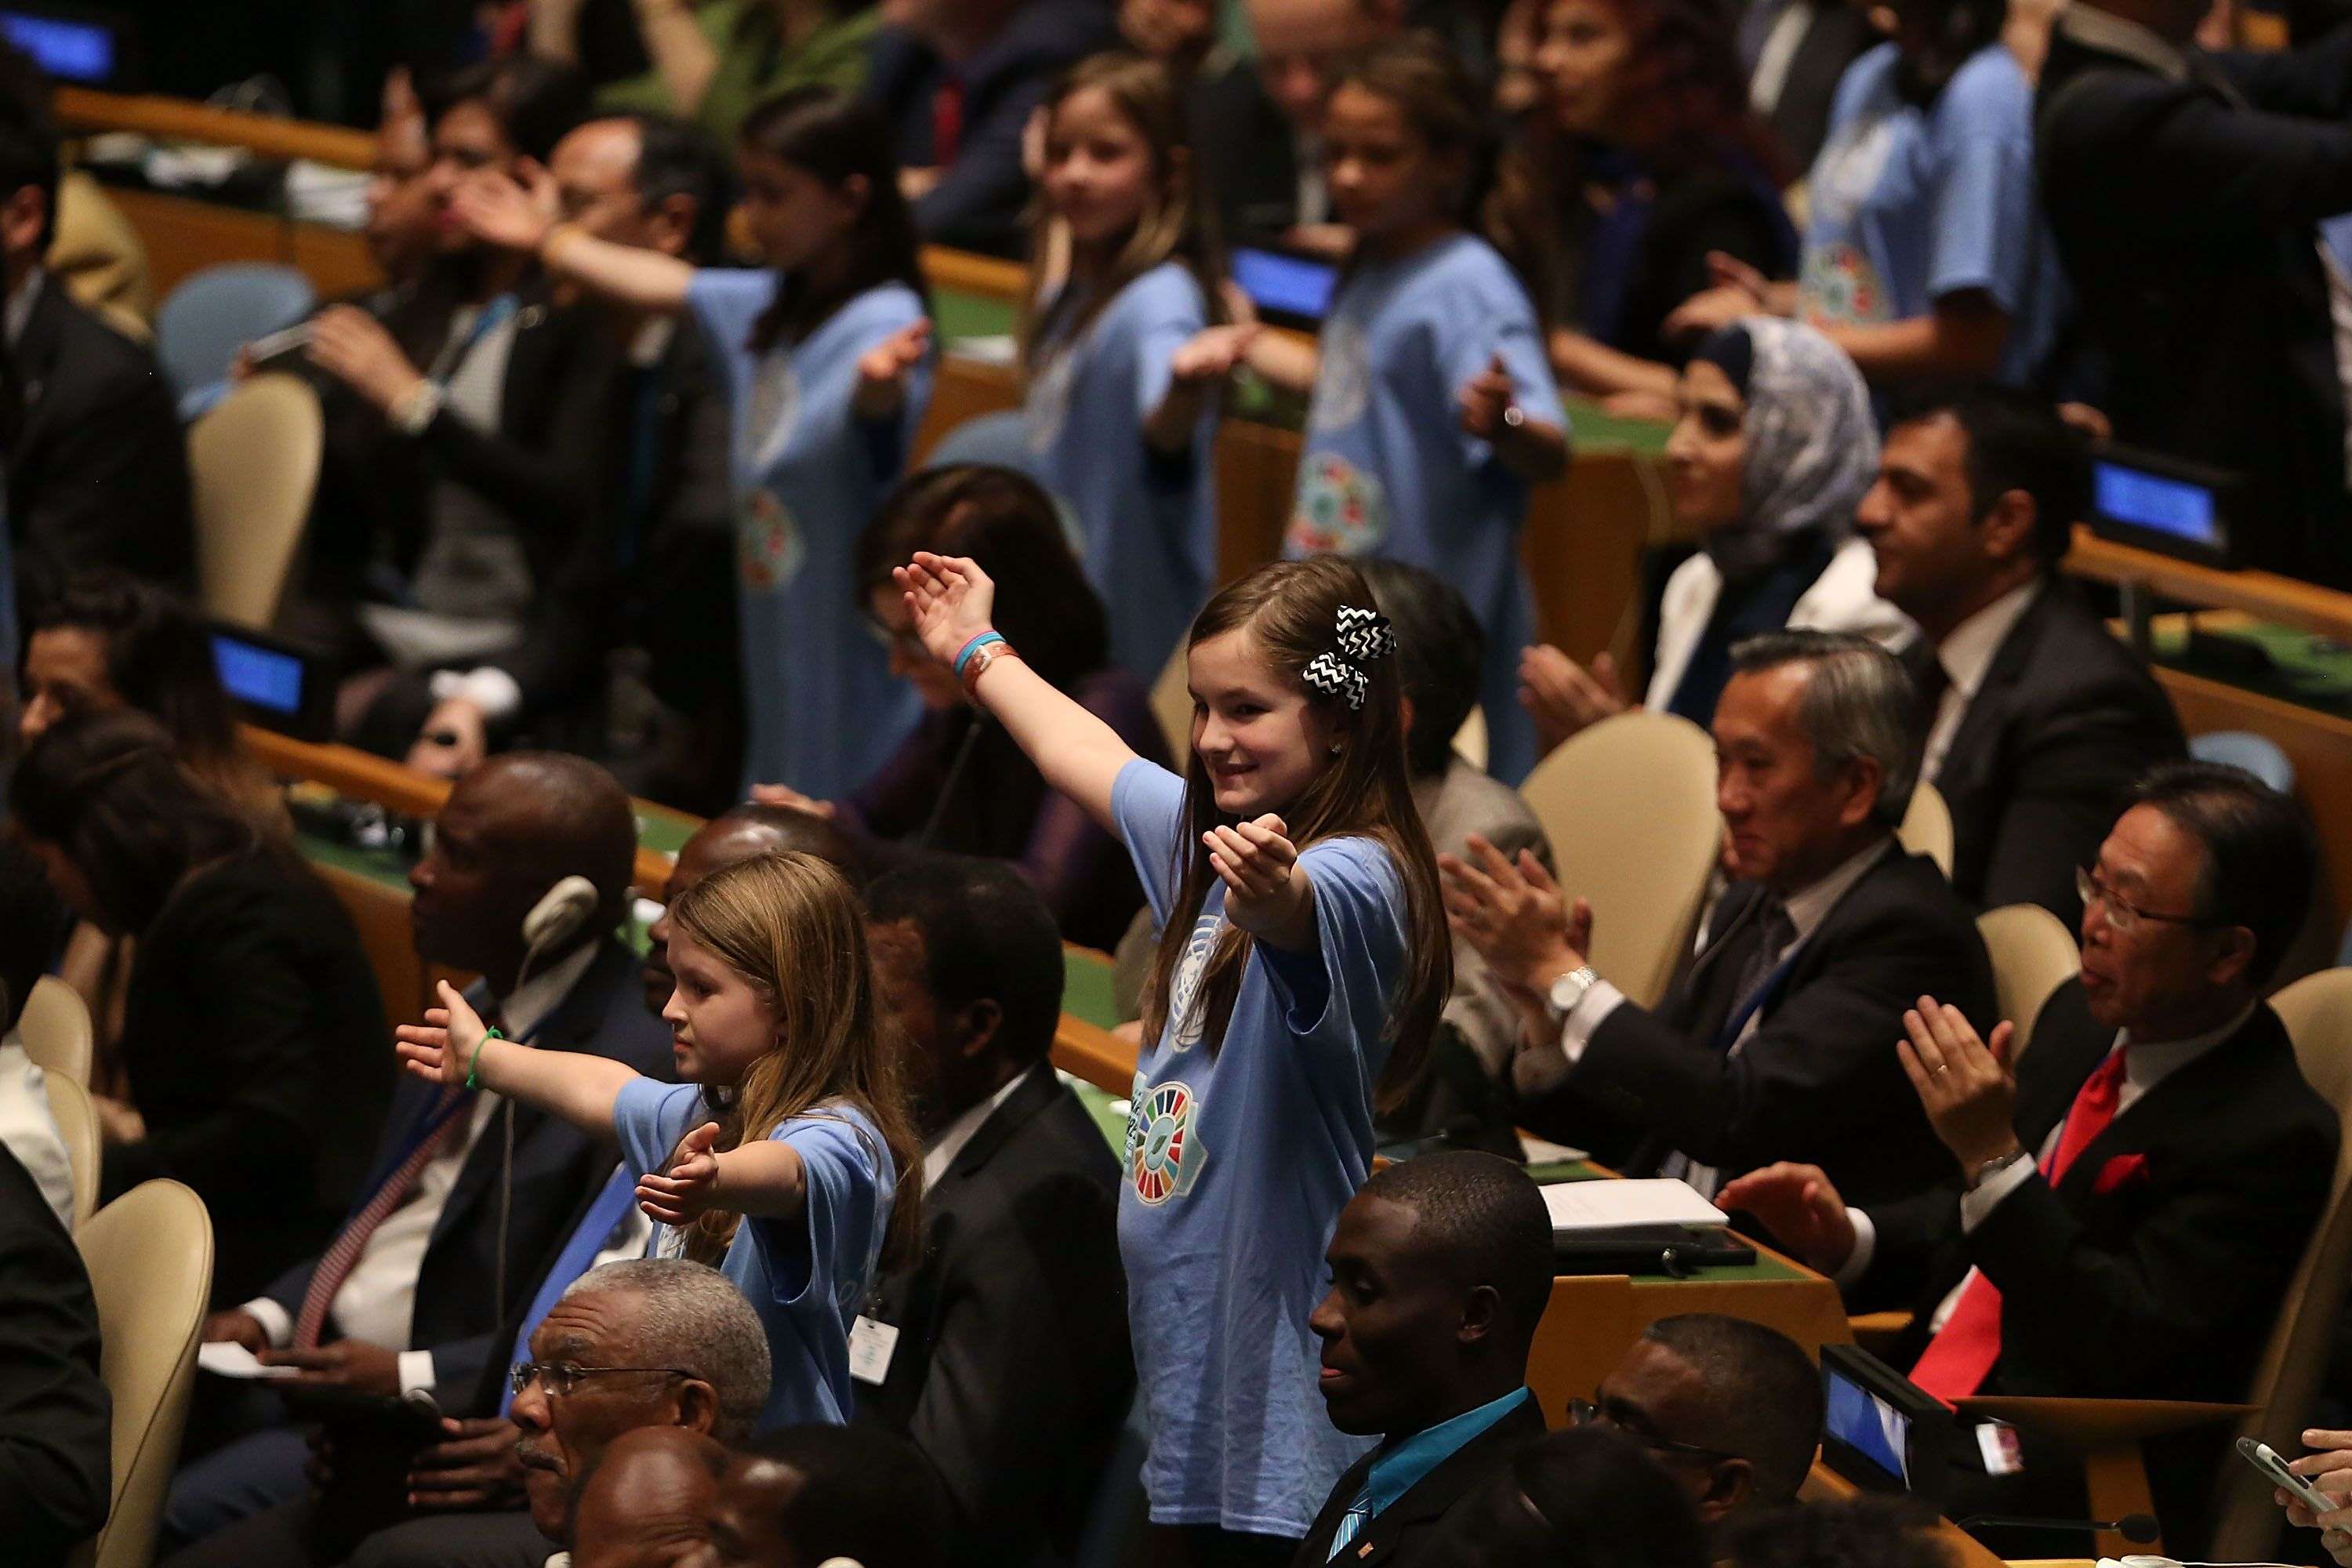 Children from around the world stand with leaders and country delegates in the General Assembly Hall at the UN signing ceremony for the Paris Agreement on April 22 in New York City. Photo: AFP